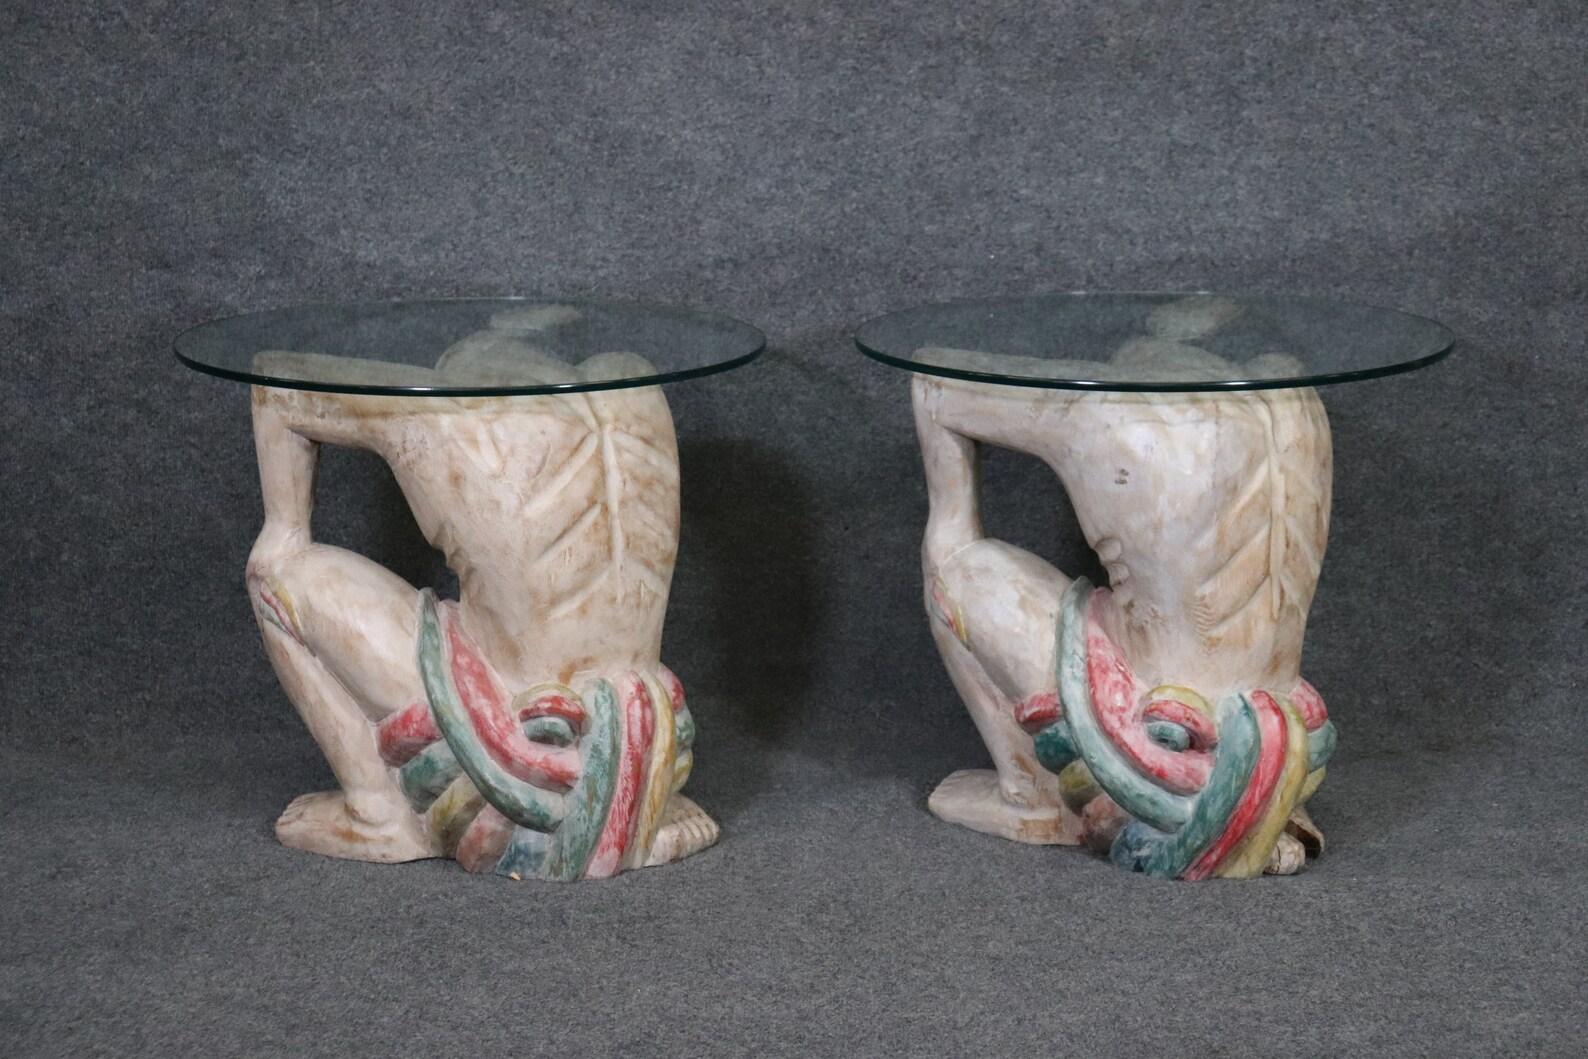 Dimensions: H: 20in W: 23 3/4in D: 23 3/4in
This is an exceptional Pair of Carved Figural Glass Top end tables perfect for any living room, office, or bedroom. These end tables are extremely unique with the carved figures holding up the glass. These